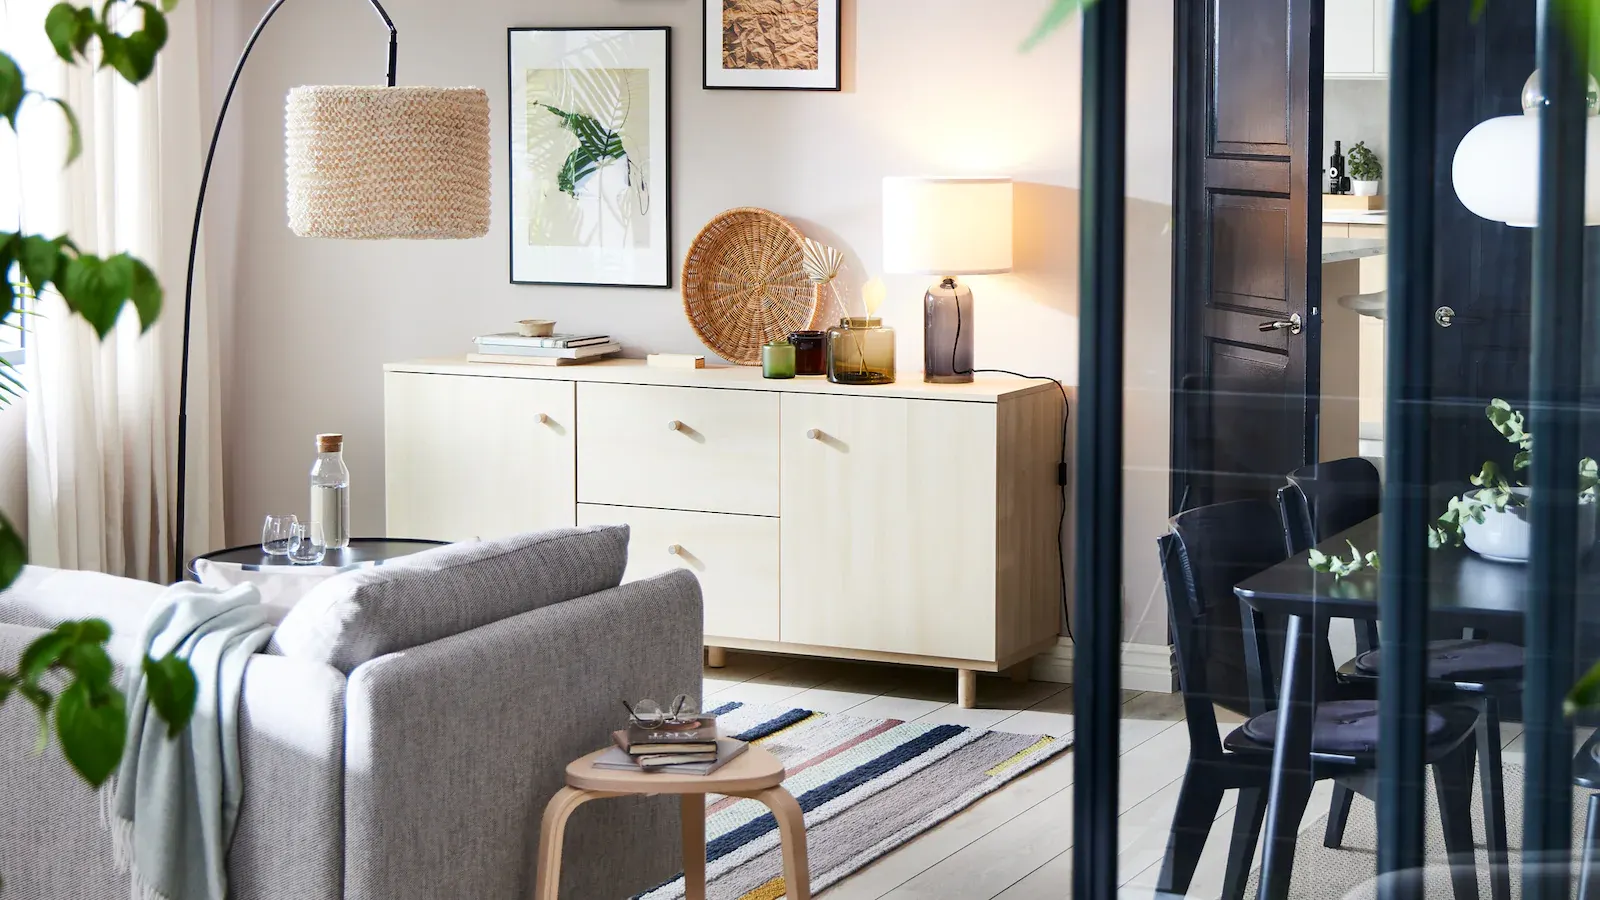 Rooms for Furniture and Furnishings - IKEA